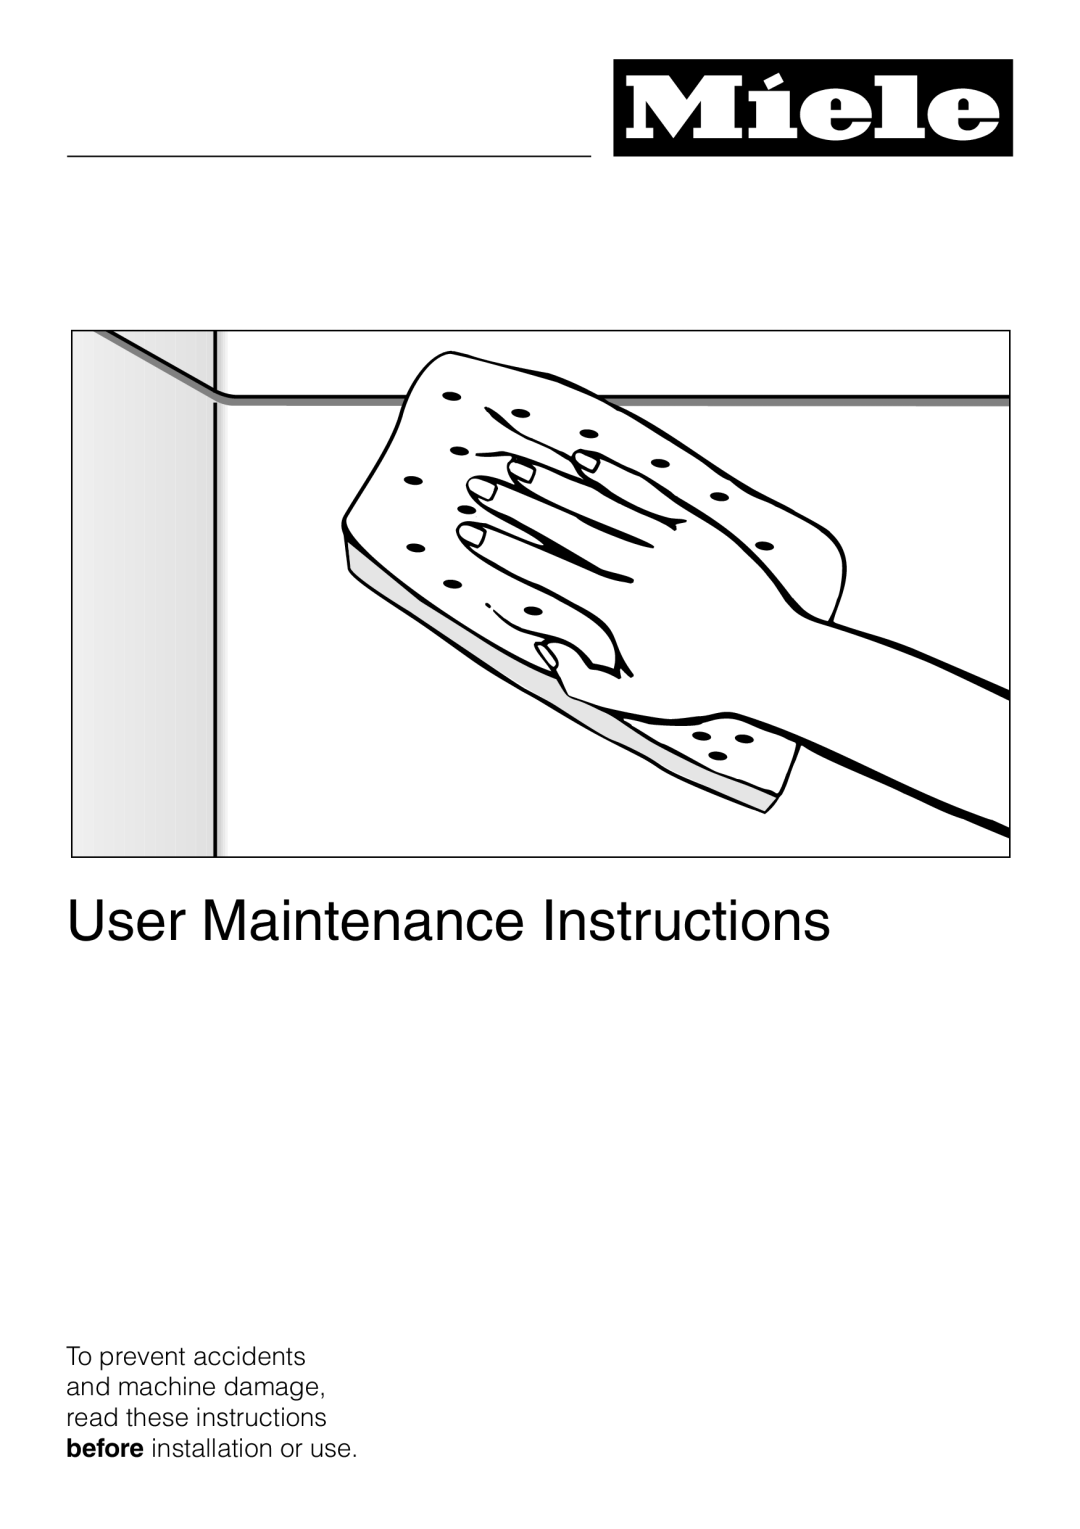 Miele G 2420 G 2430 operating instructions User Maintenance Instructions 